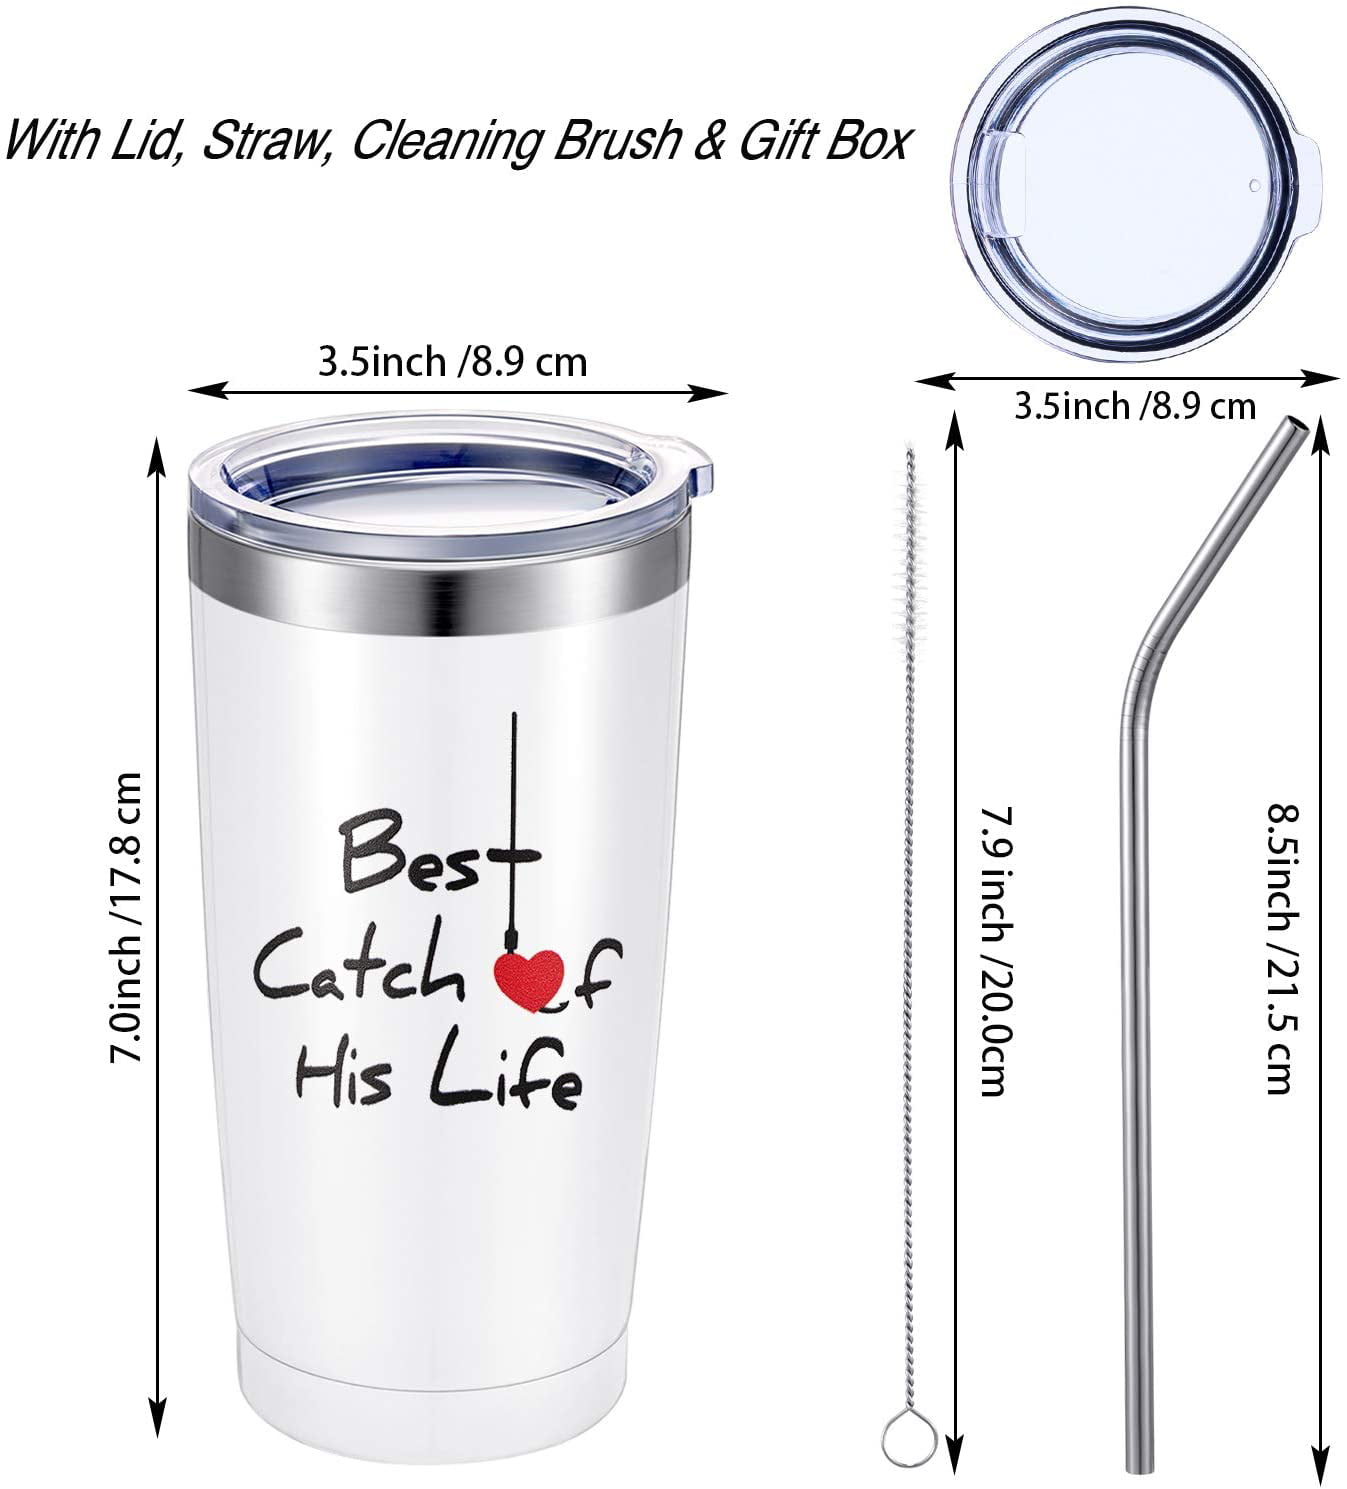 Black, White One Great Fisherman Best Catch of His Life Couples Mug Gift for Husband and Wife Wedding Anniversary Funny Engagement Gift Idea 20 oz Stainless Steel Mug Tumbler with Straw Brush